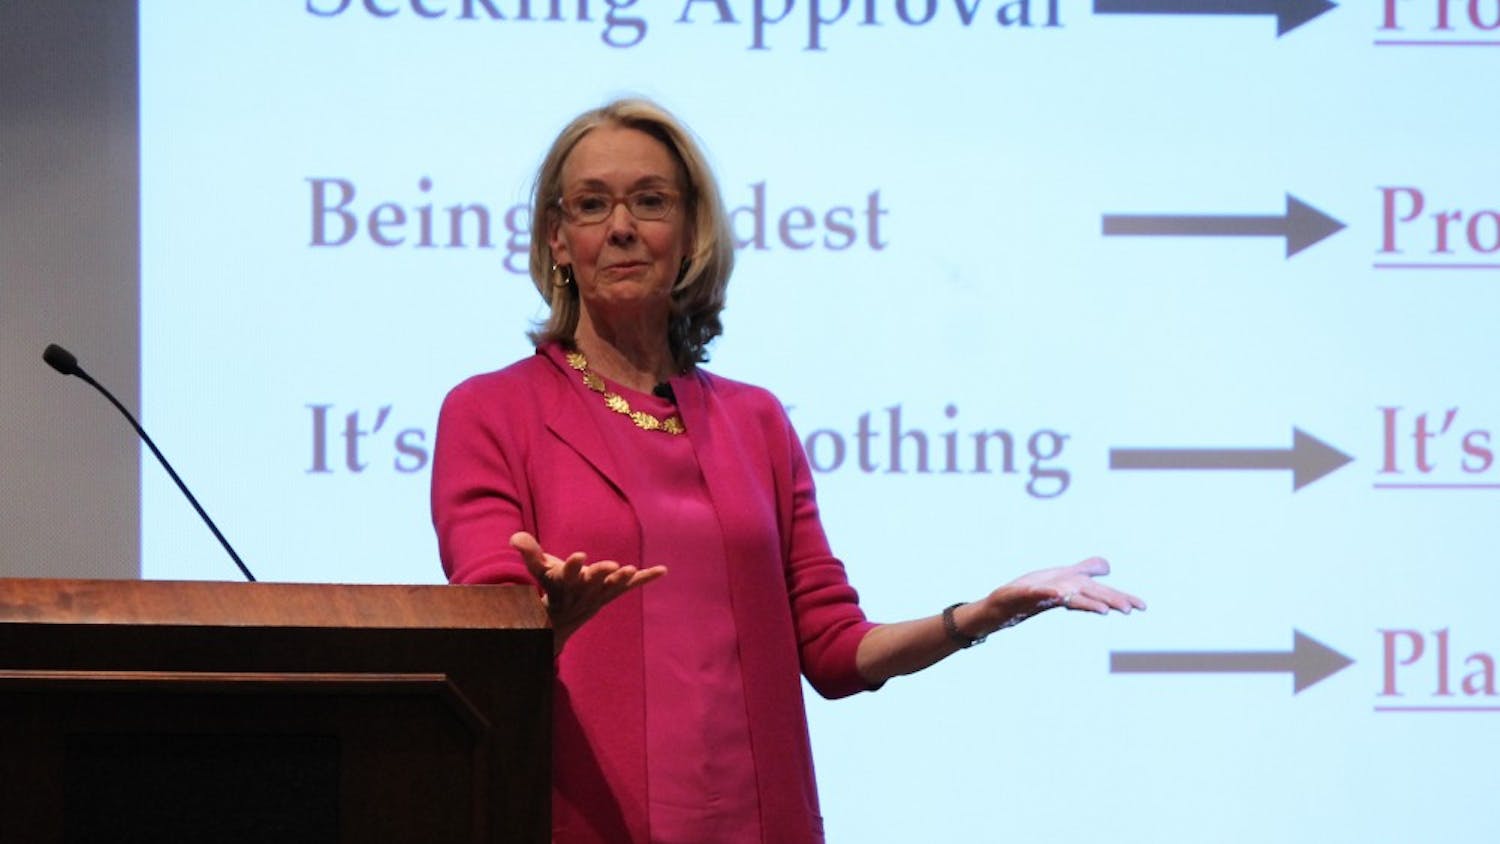 Kathryn Heath, a women's leadership and career coach, spoke at the Bobby Boyd Leadership Lecture on Tuesday evening.&nbsp;